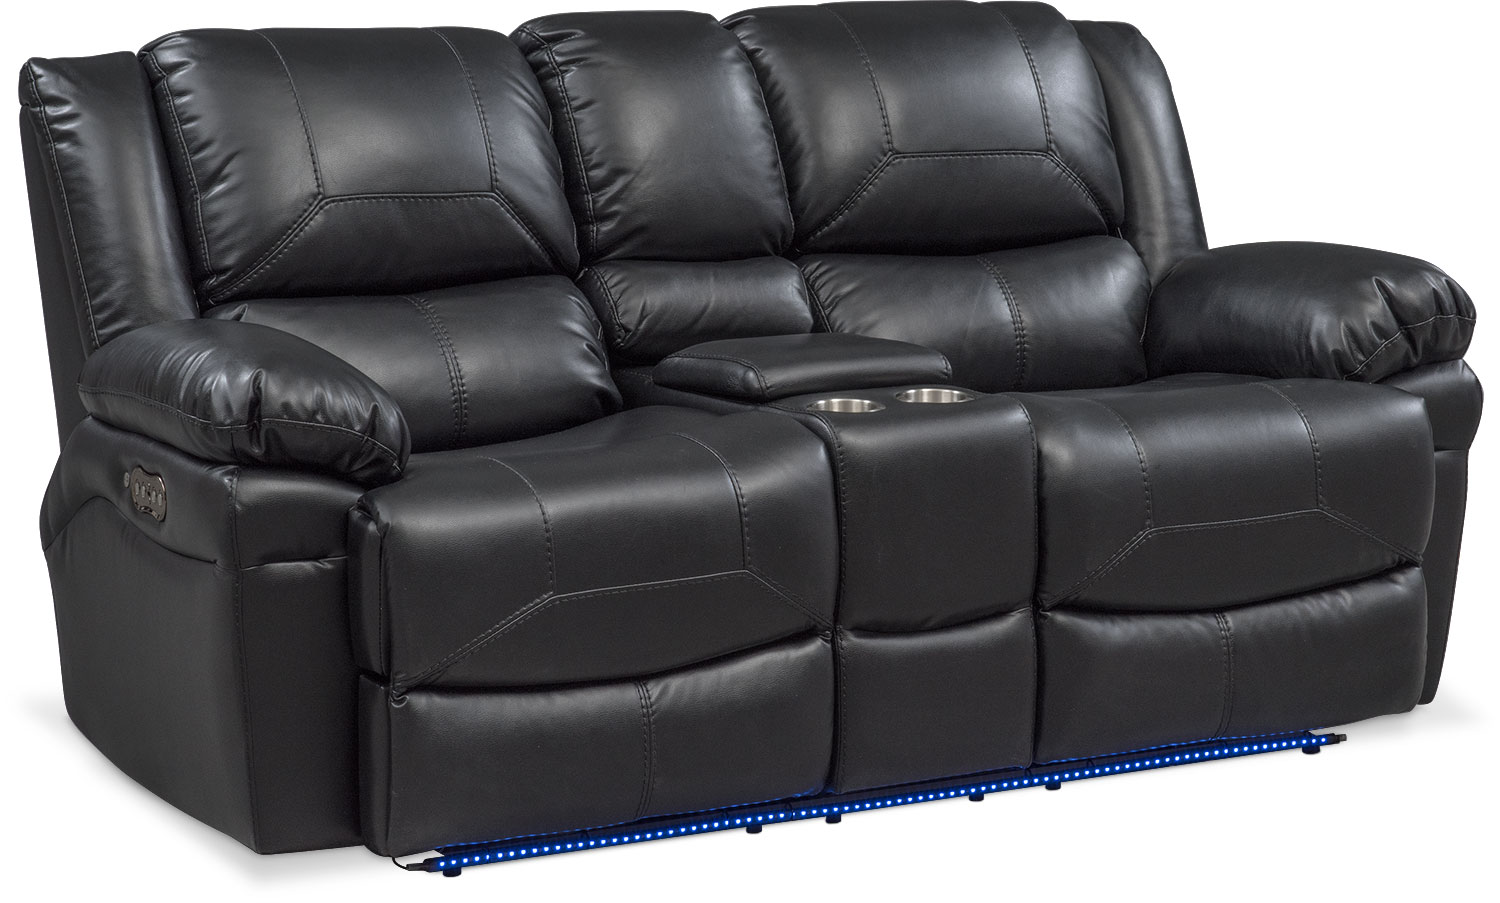 Monza Dual Power Reclining Loveseat with Console - Black | Value